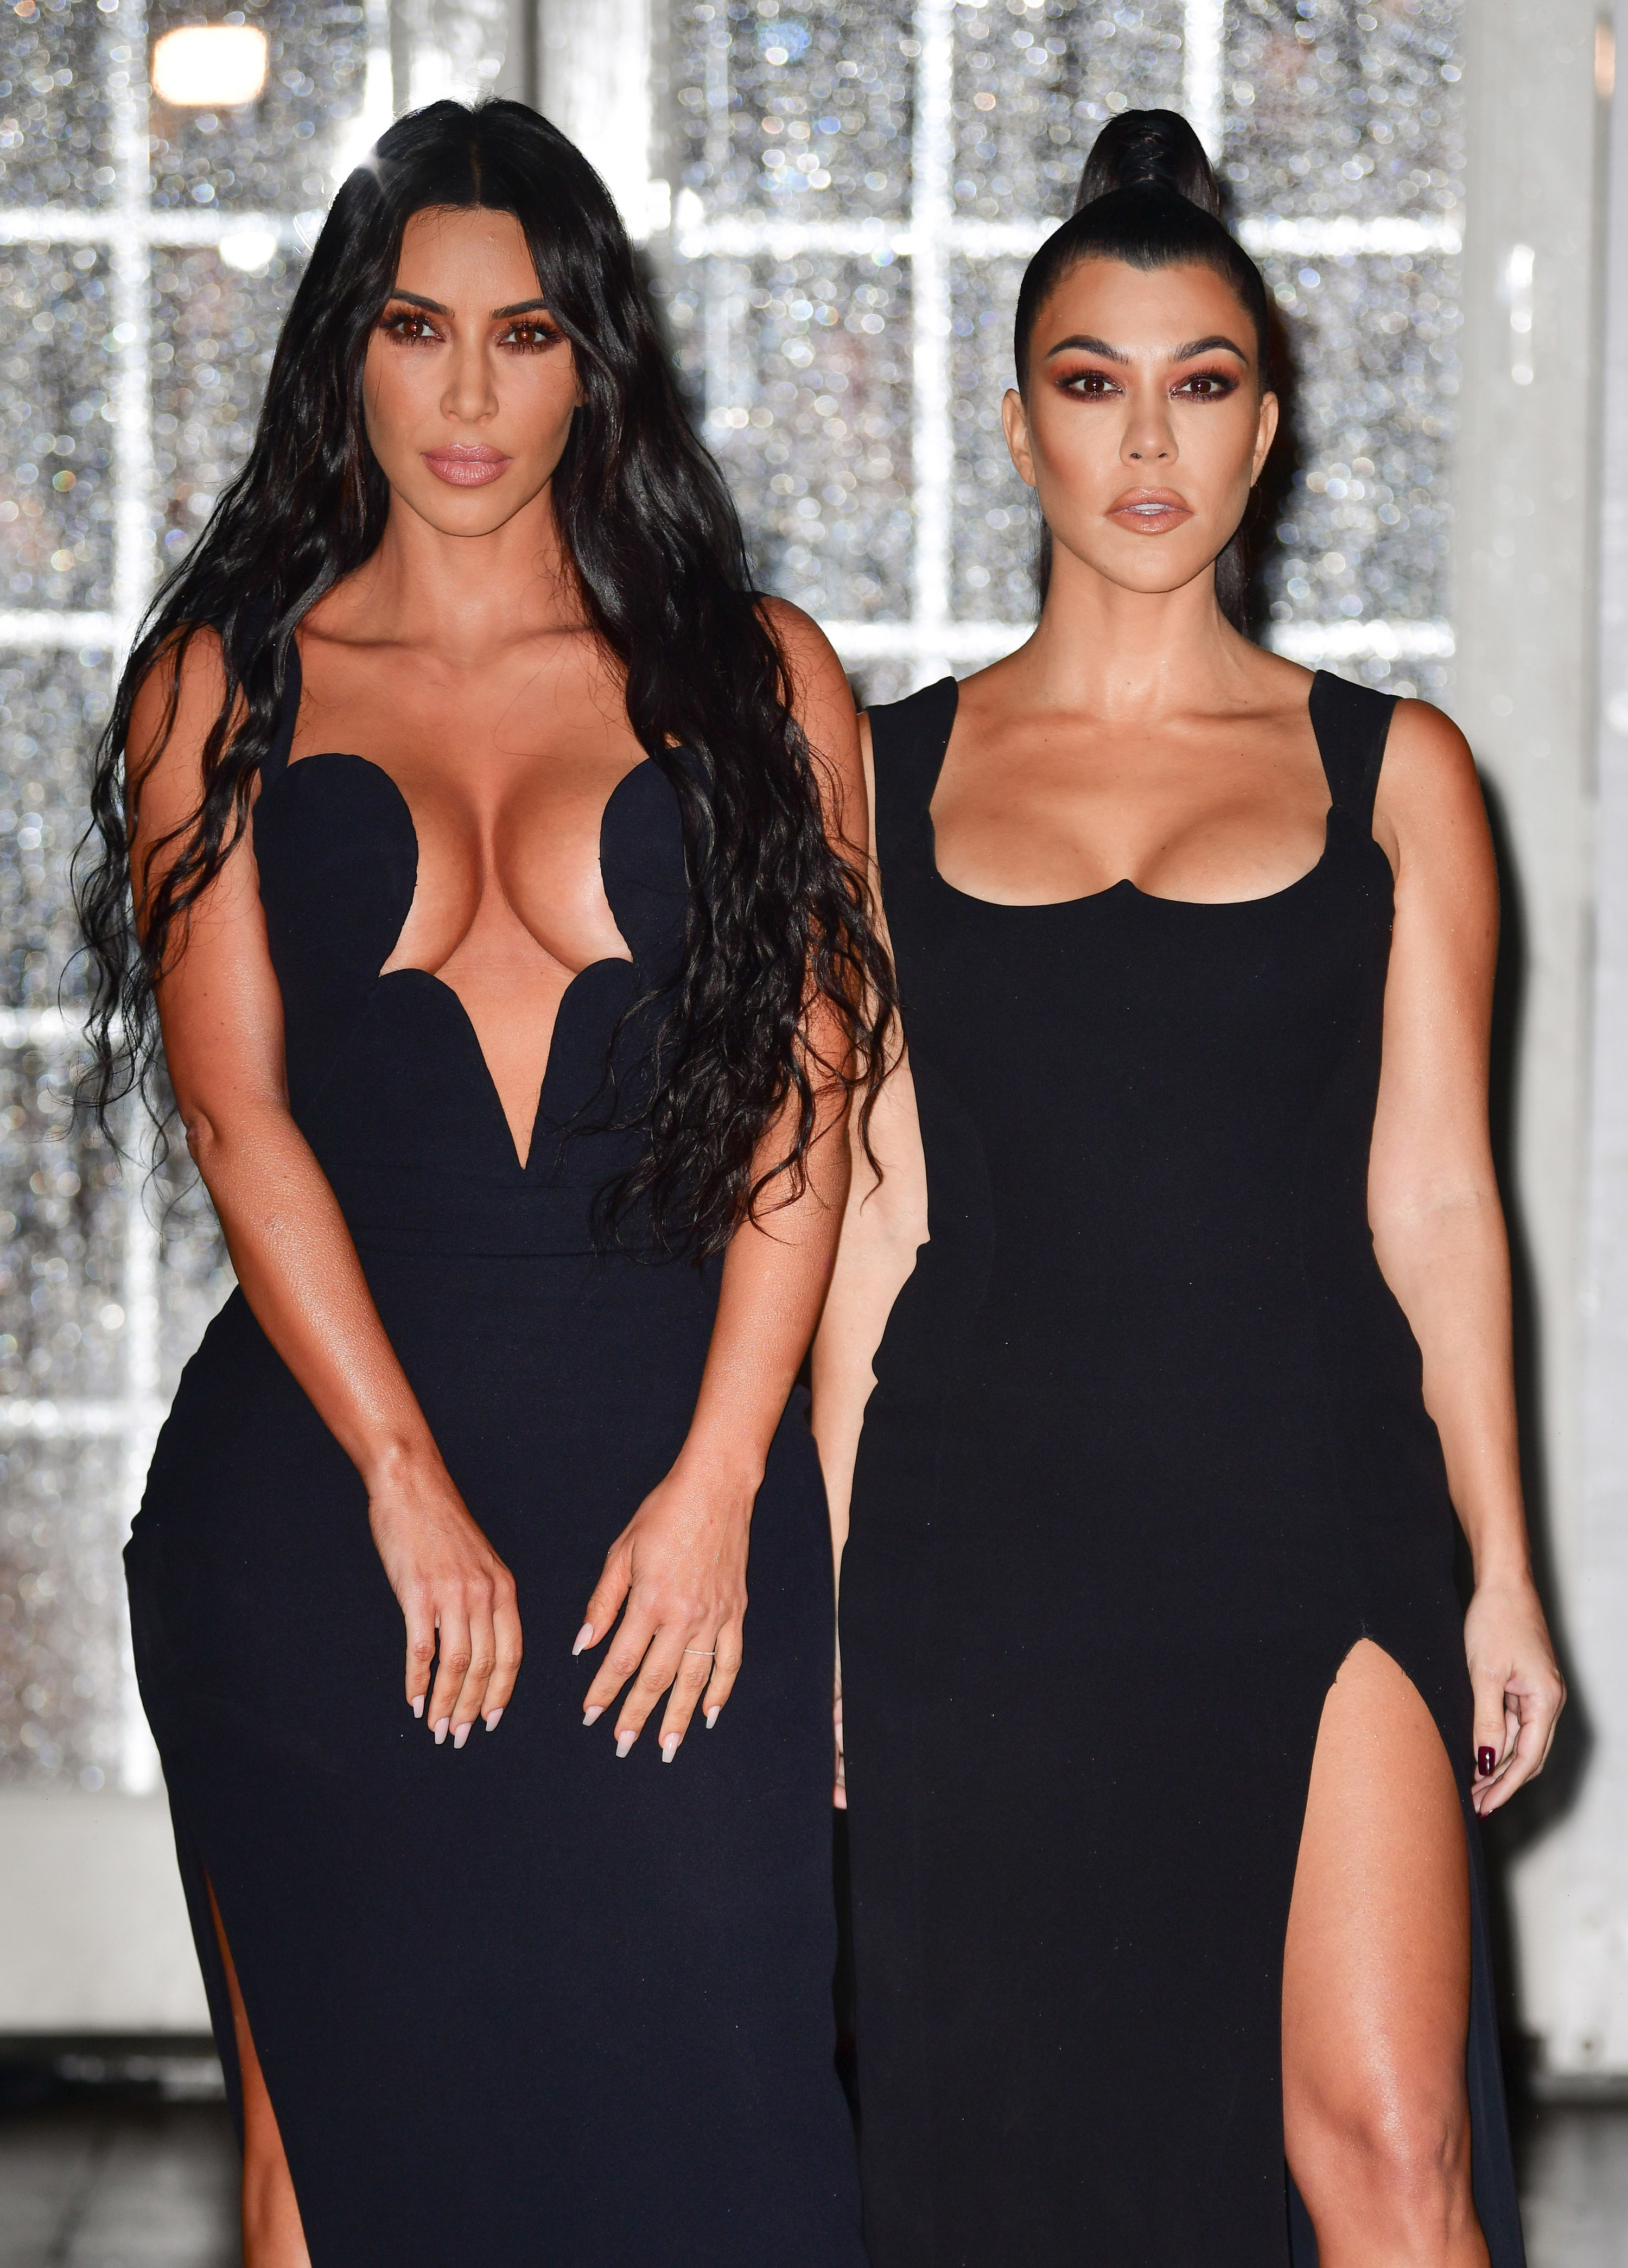 Kim and Kourtney standing together and looking serious